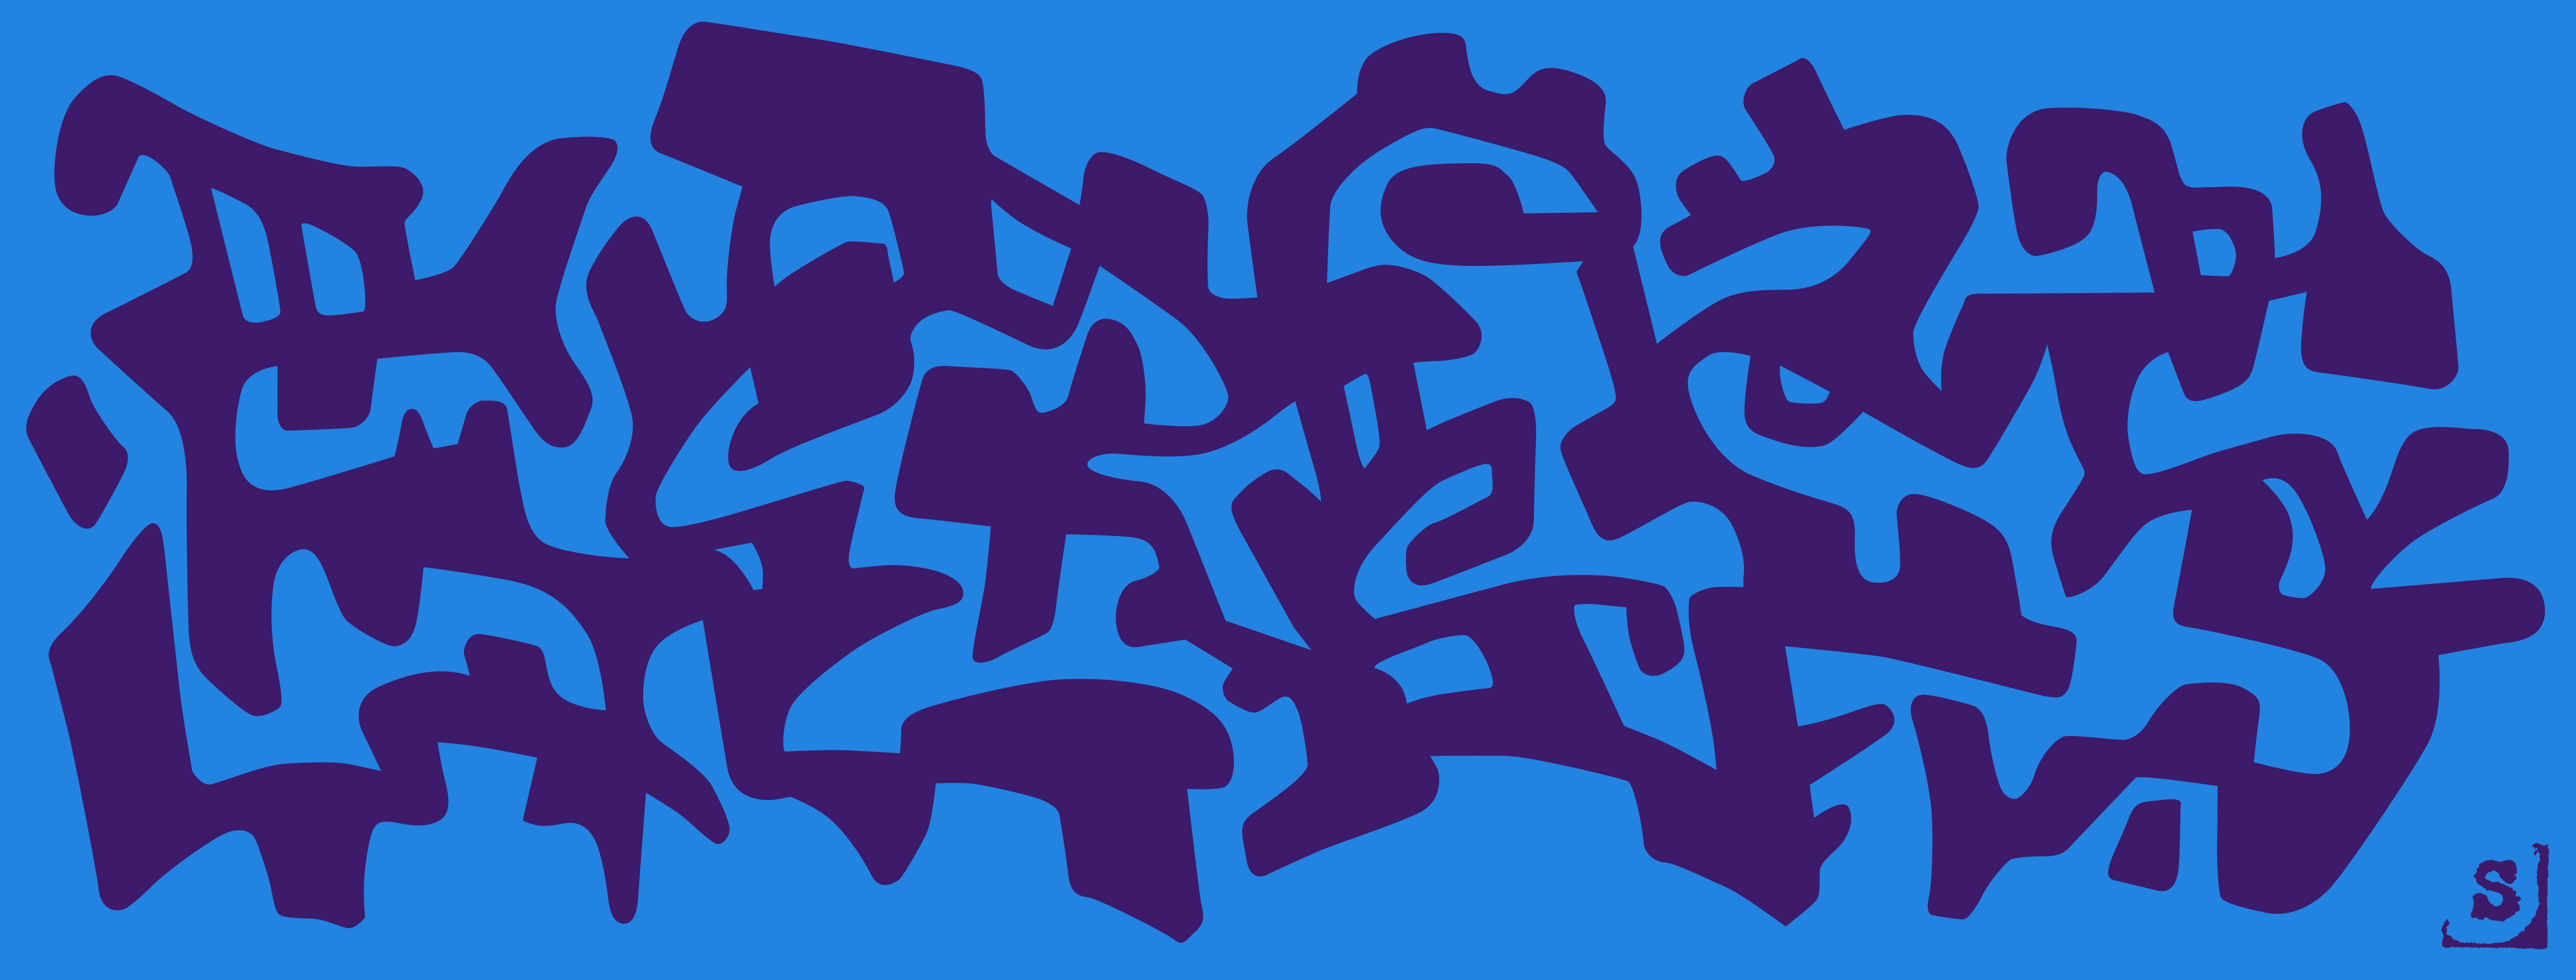 abstract letters samserif